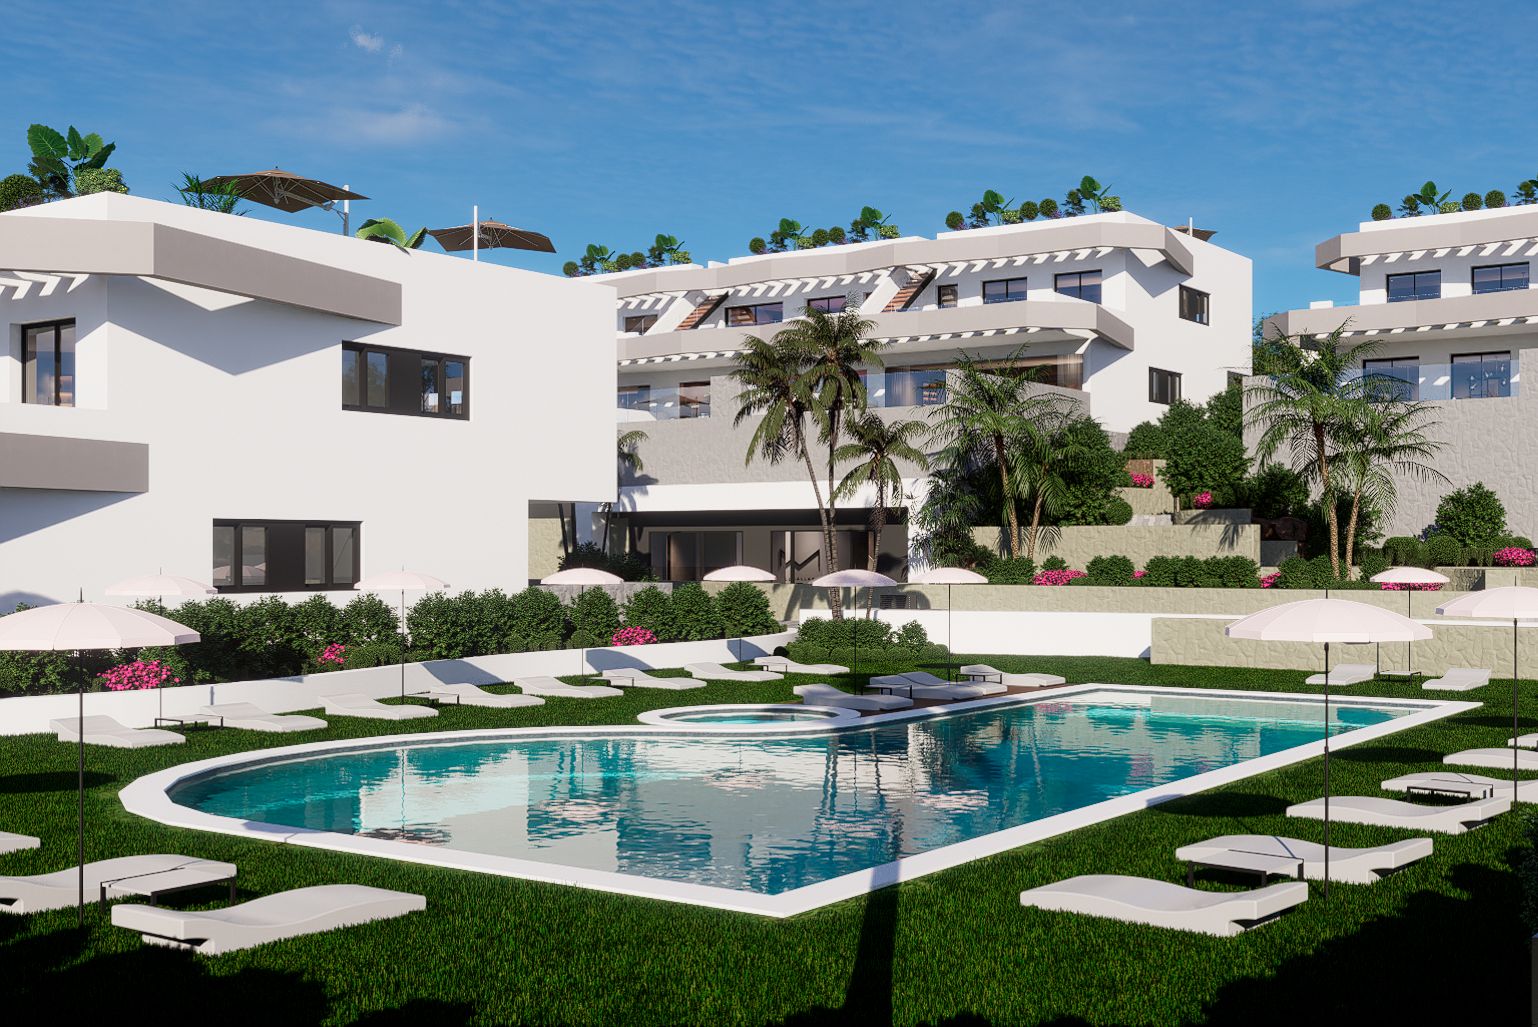 Built-in penthouse for sale in Finestrat, Costa Blanca